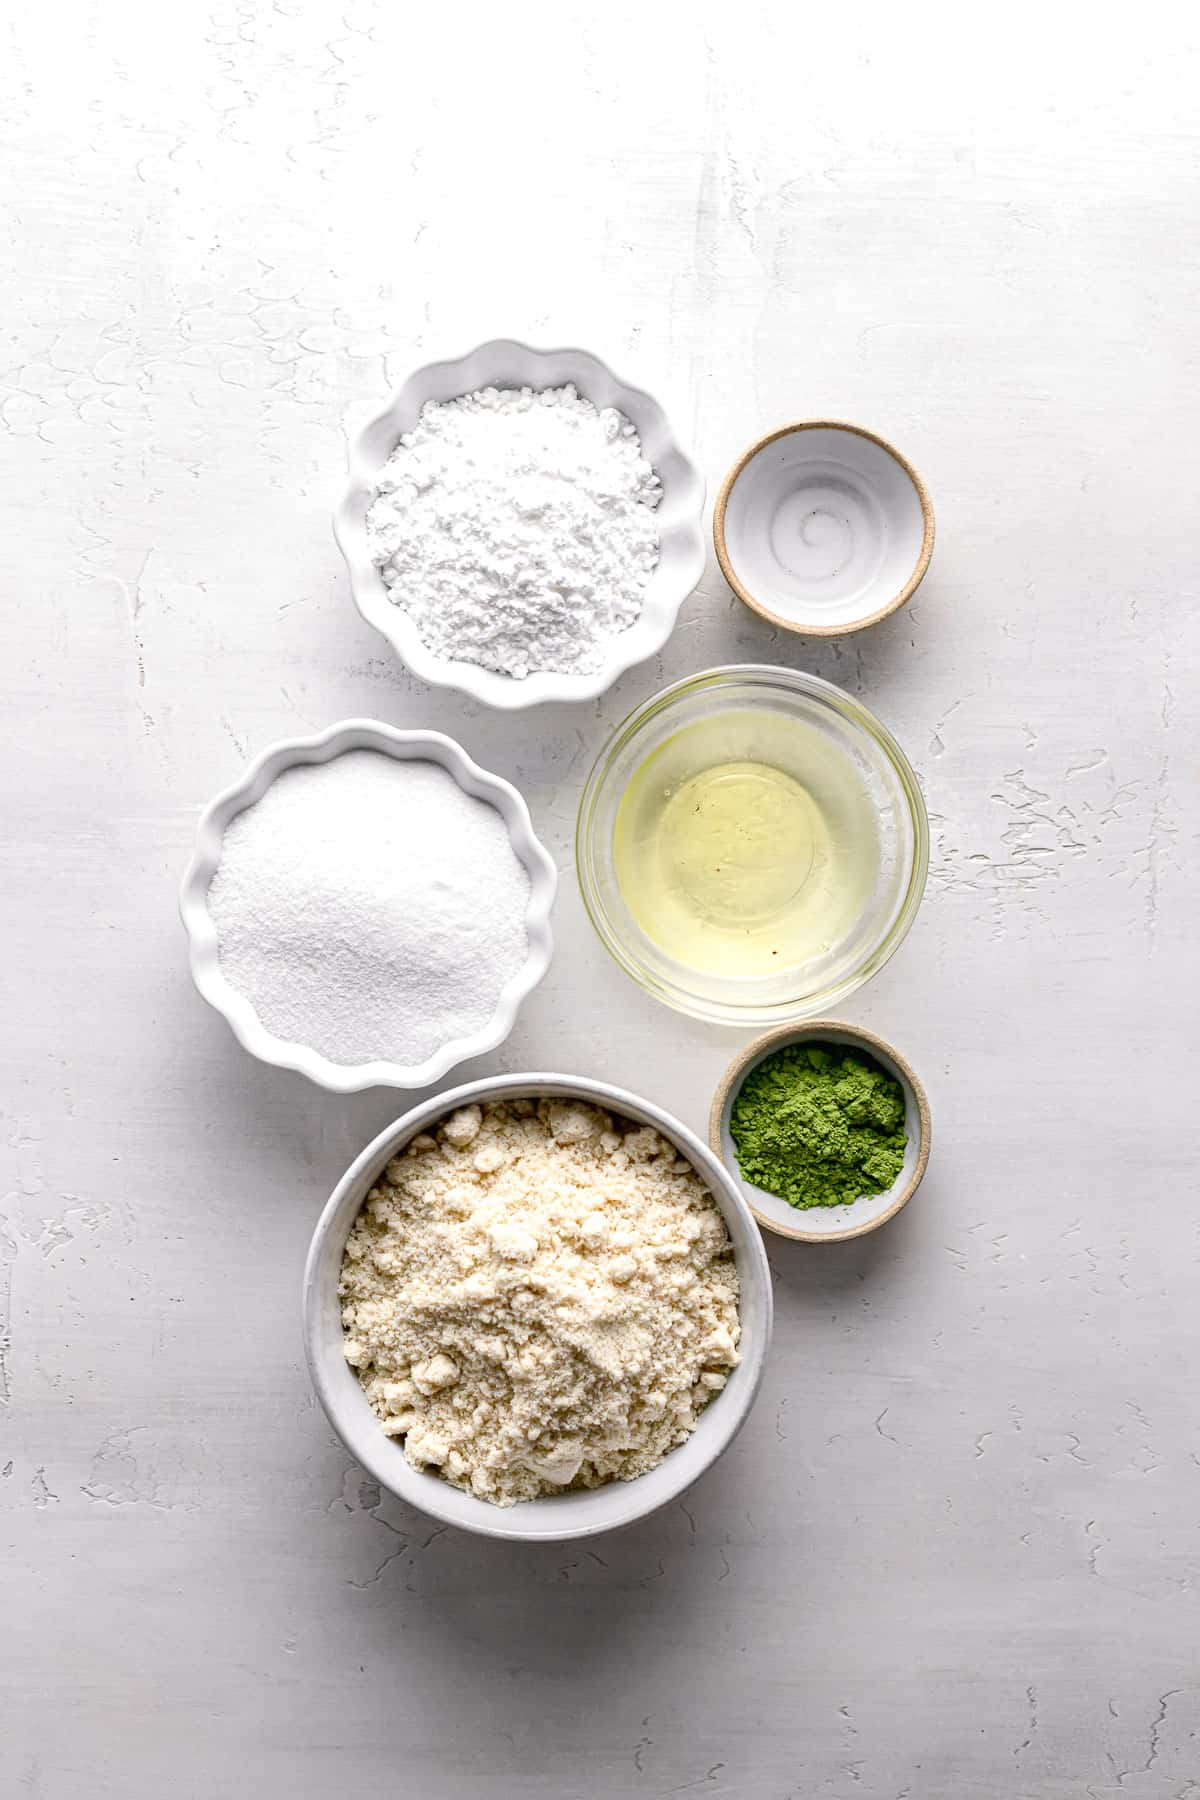 ingredients for matcha amaretti cookies.